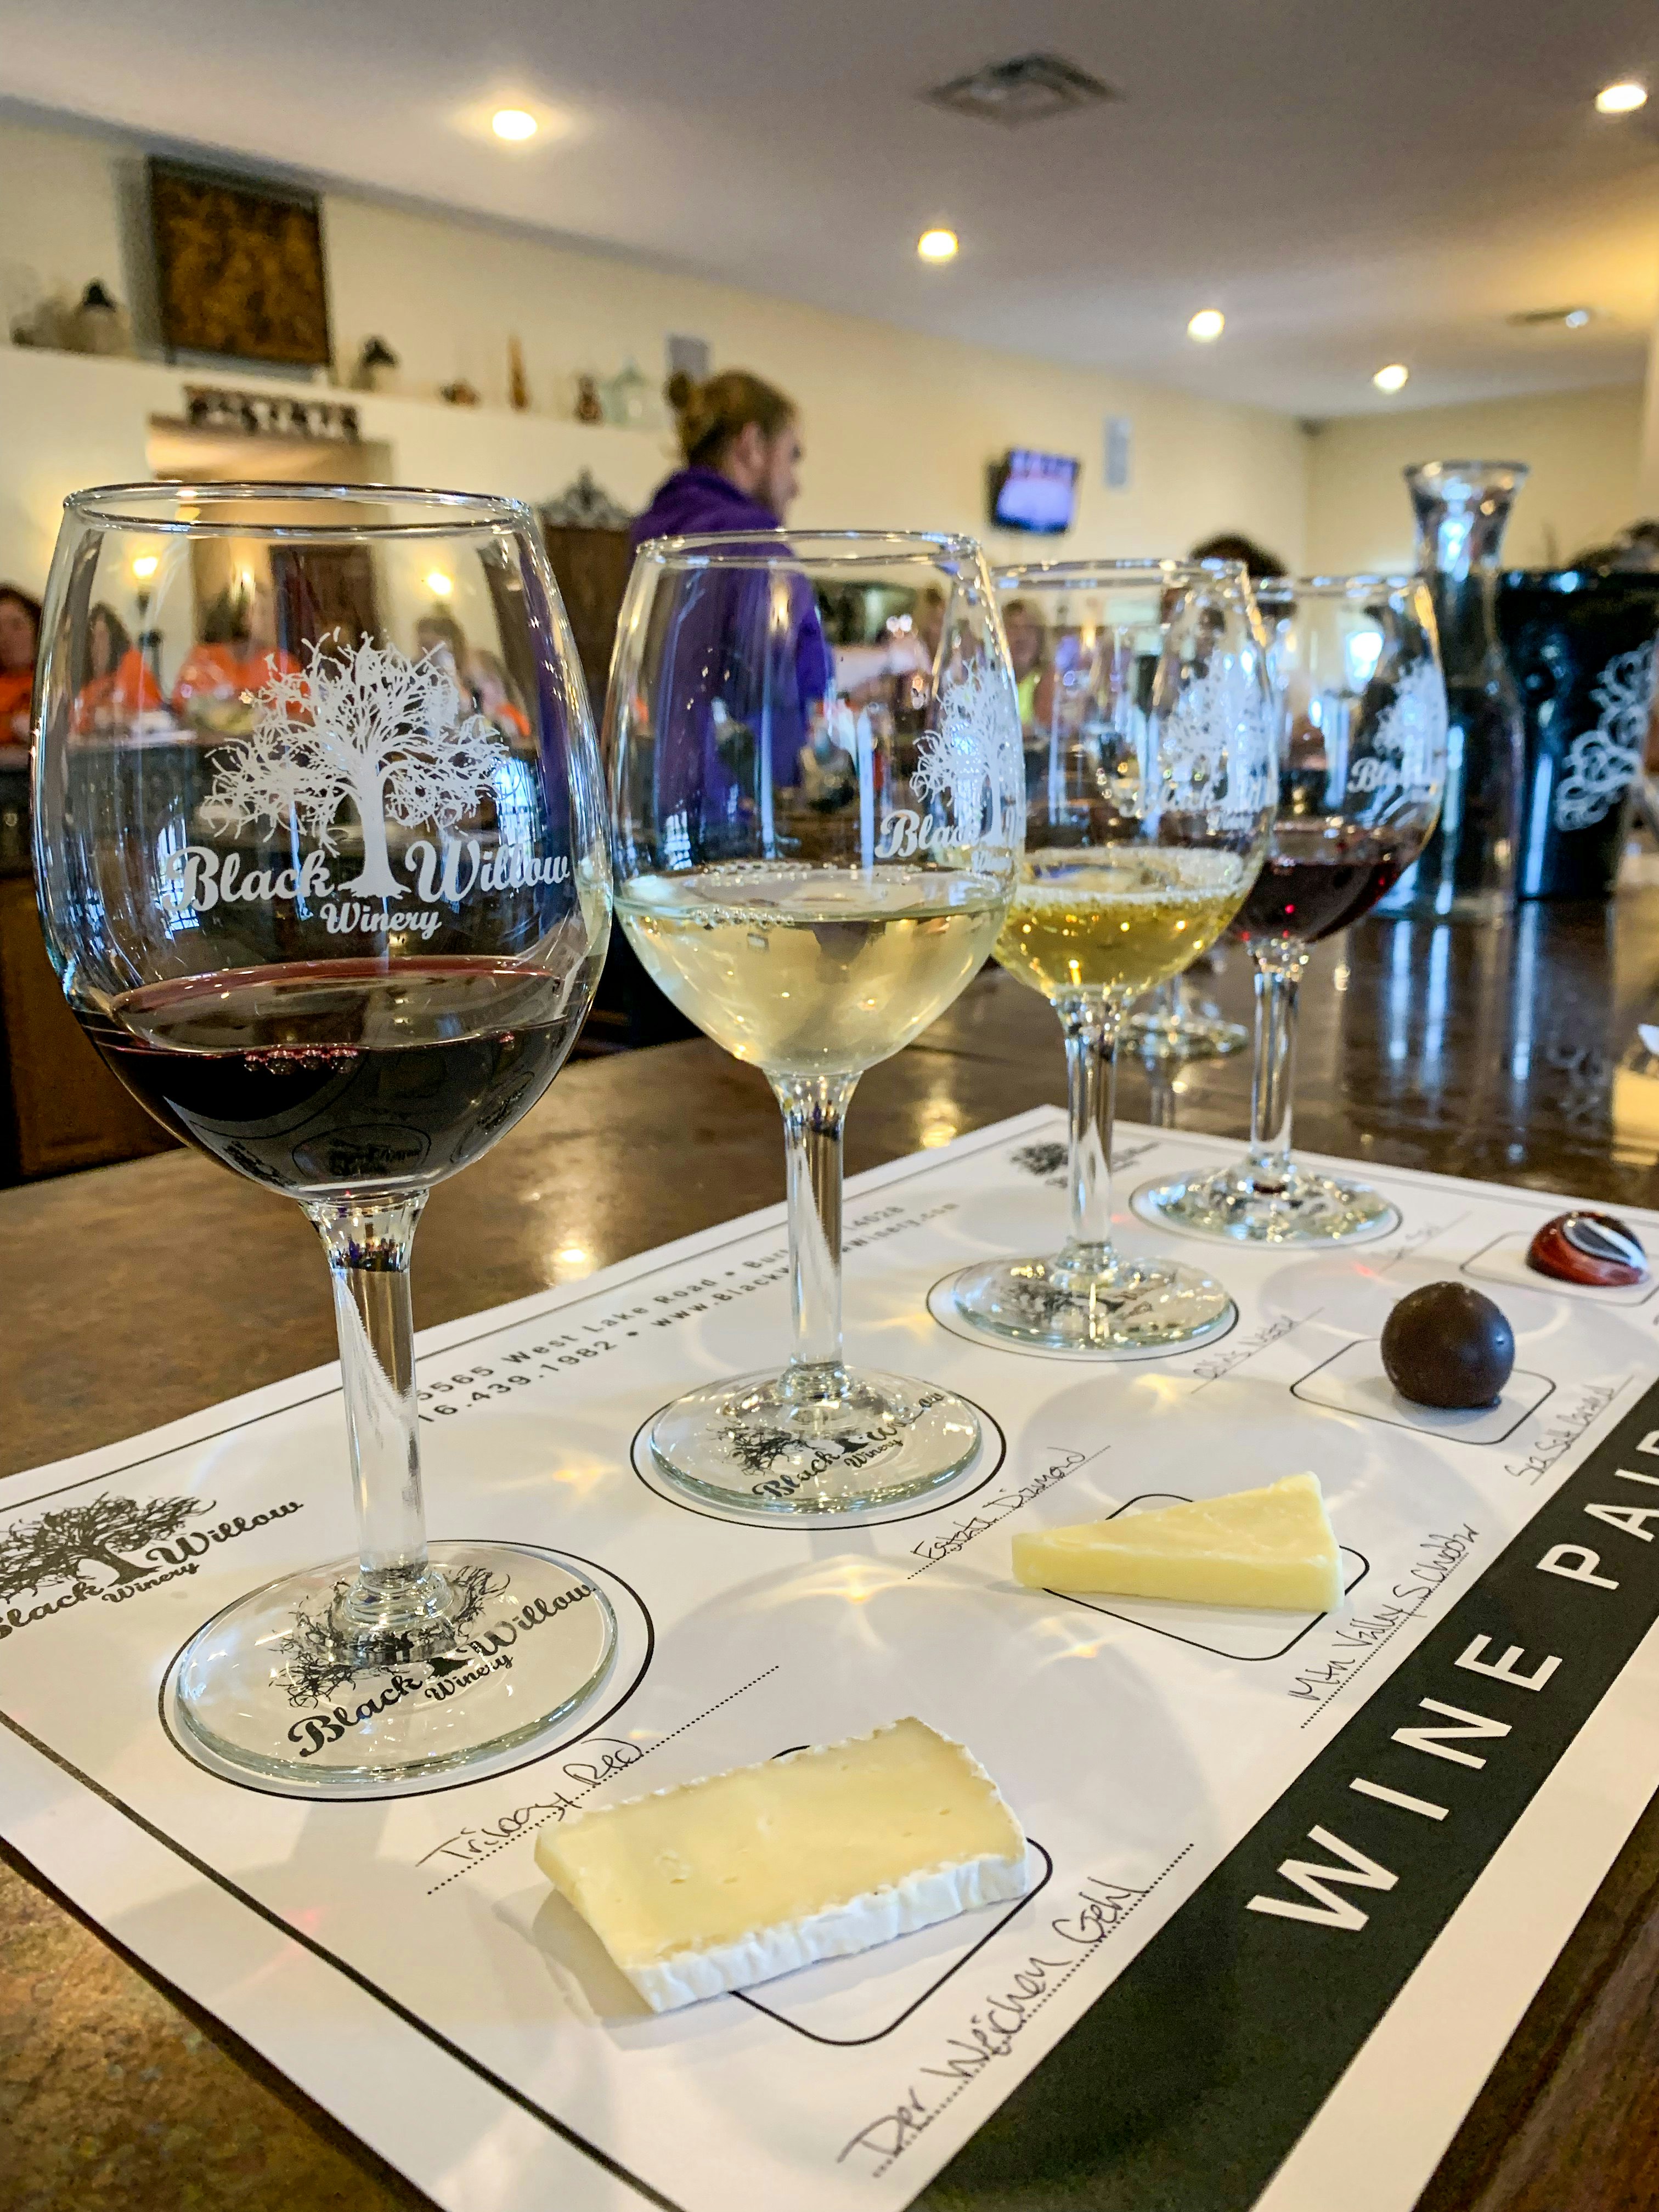 Four wine glasses, each filled with a different type of wine sit in front of an assortment of pairing items like cheese and chocolate in the Black Willow Winery 